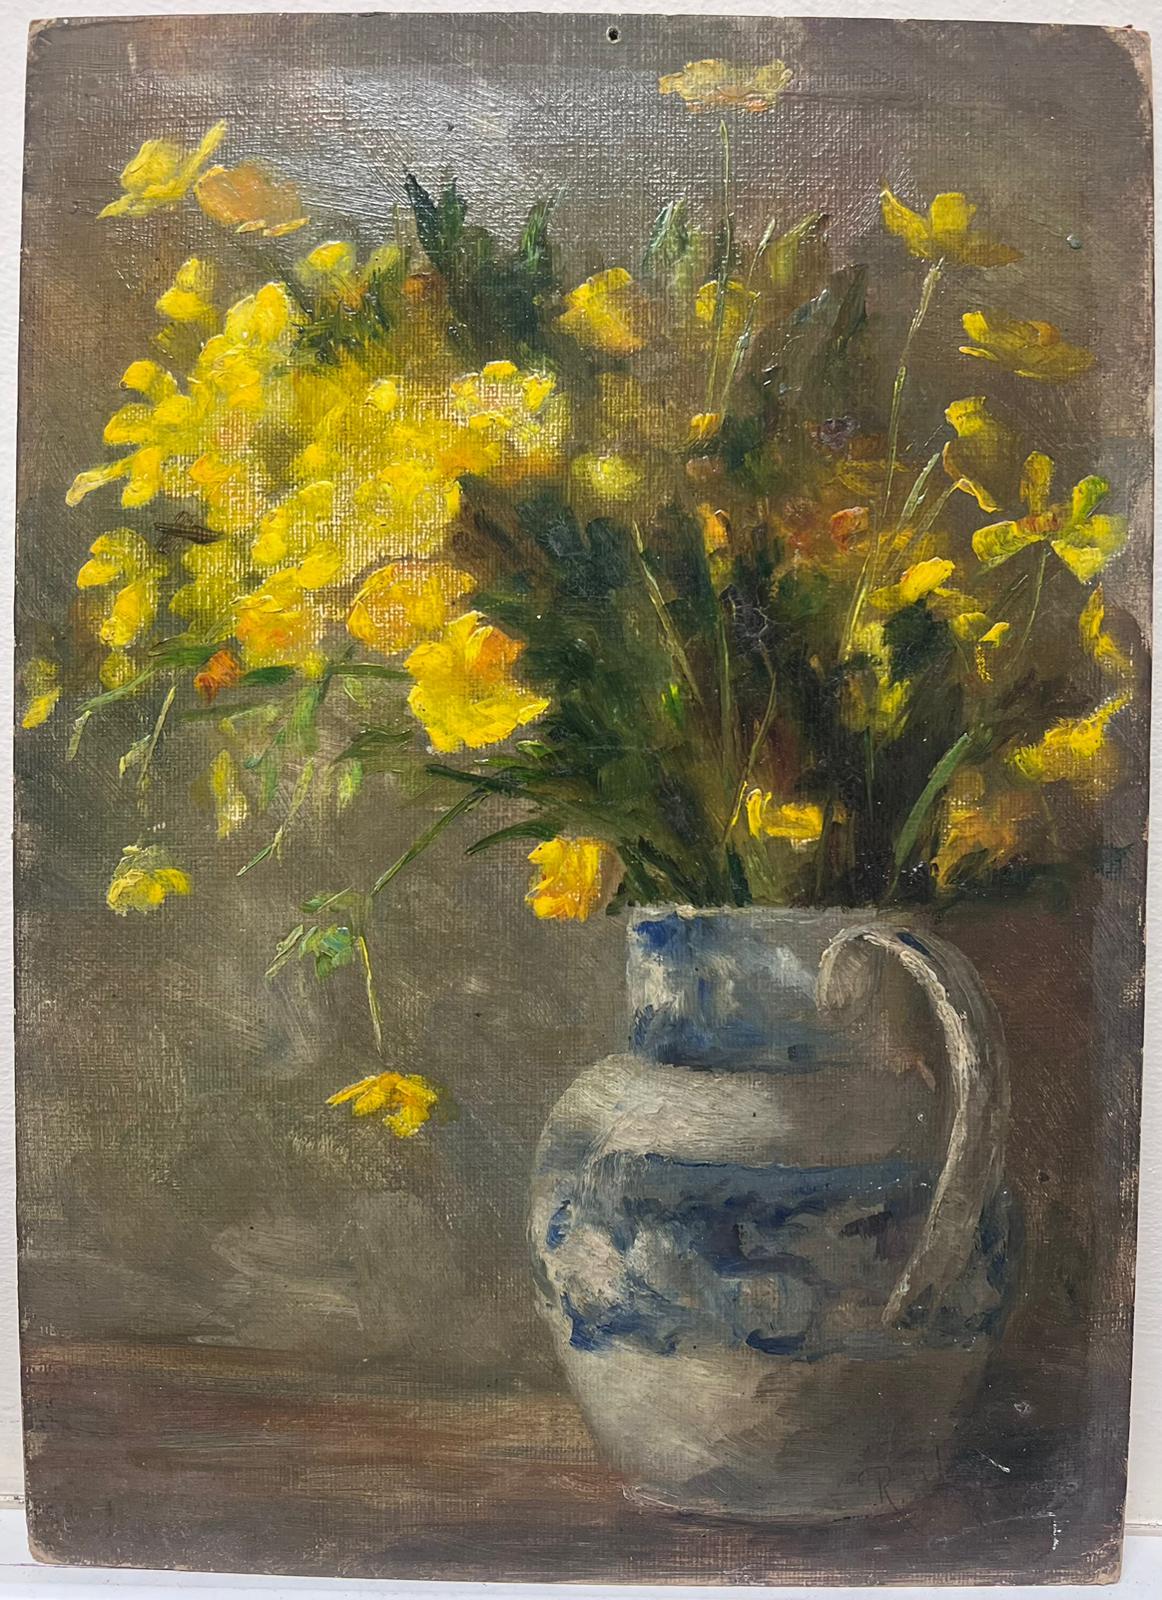 Yellow Flowers in Blue Vase
English Impressionist early 20th century
signed oil on board, unframed
inscribed verso
board: 14 x 10 inches
inscribed verso
provenance: private collection, England
condition: a few minor scuffs but overall good and sound